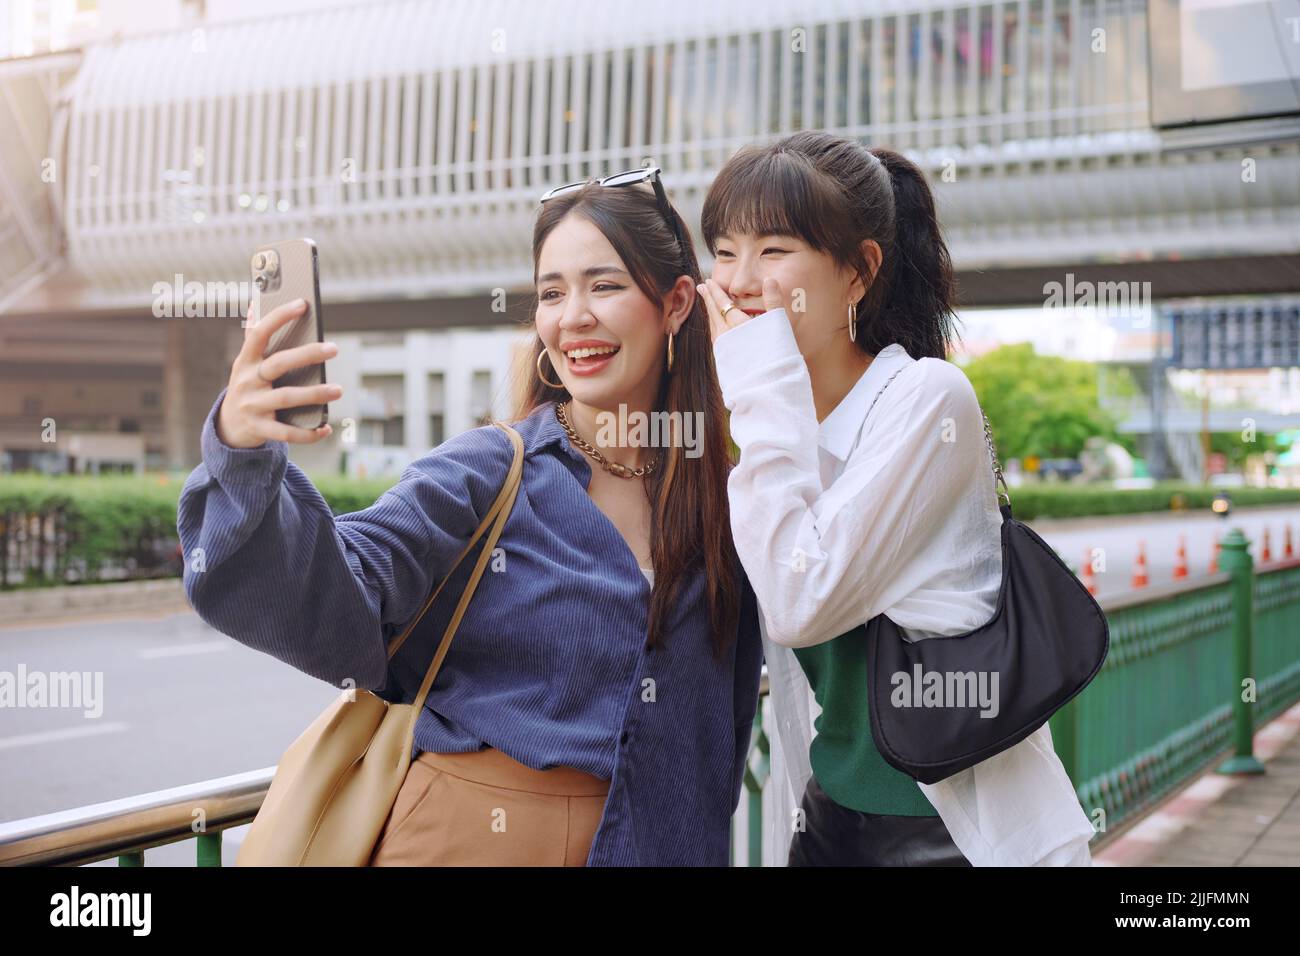 Happy two young women make selfie video call with her friend on city street. Stock Photo